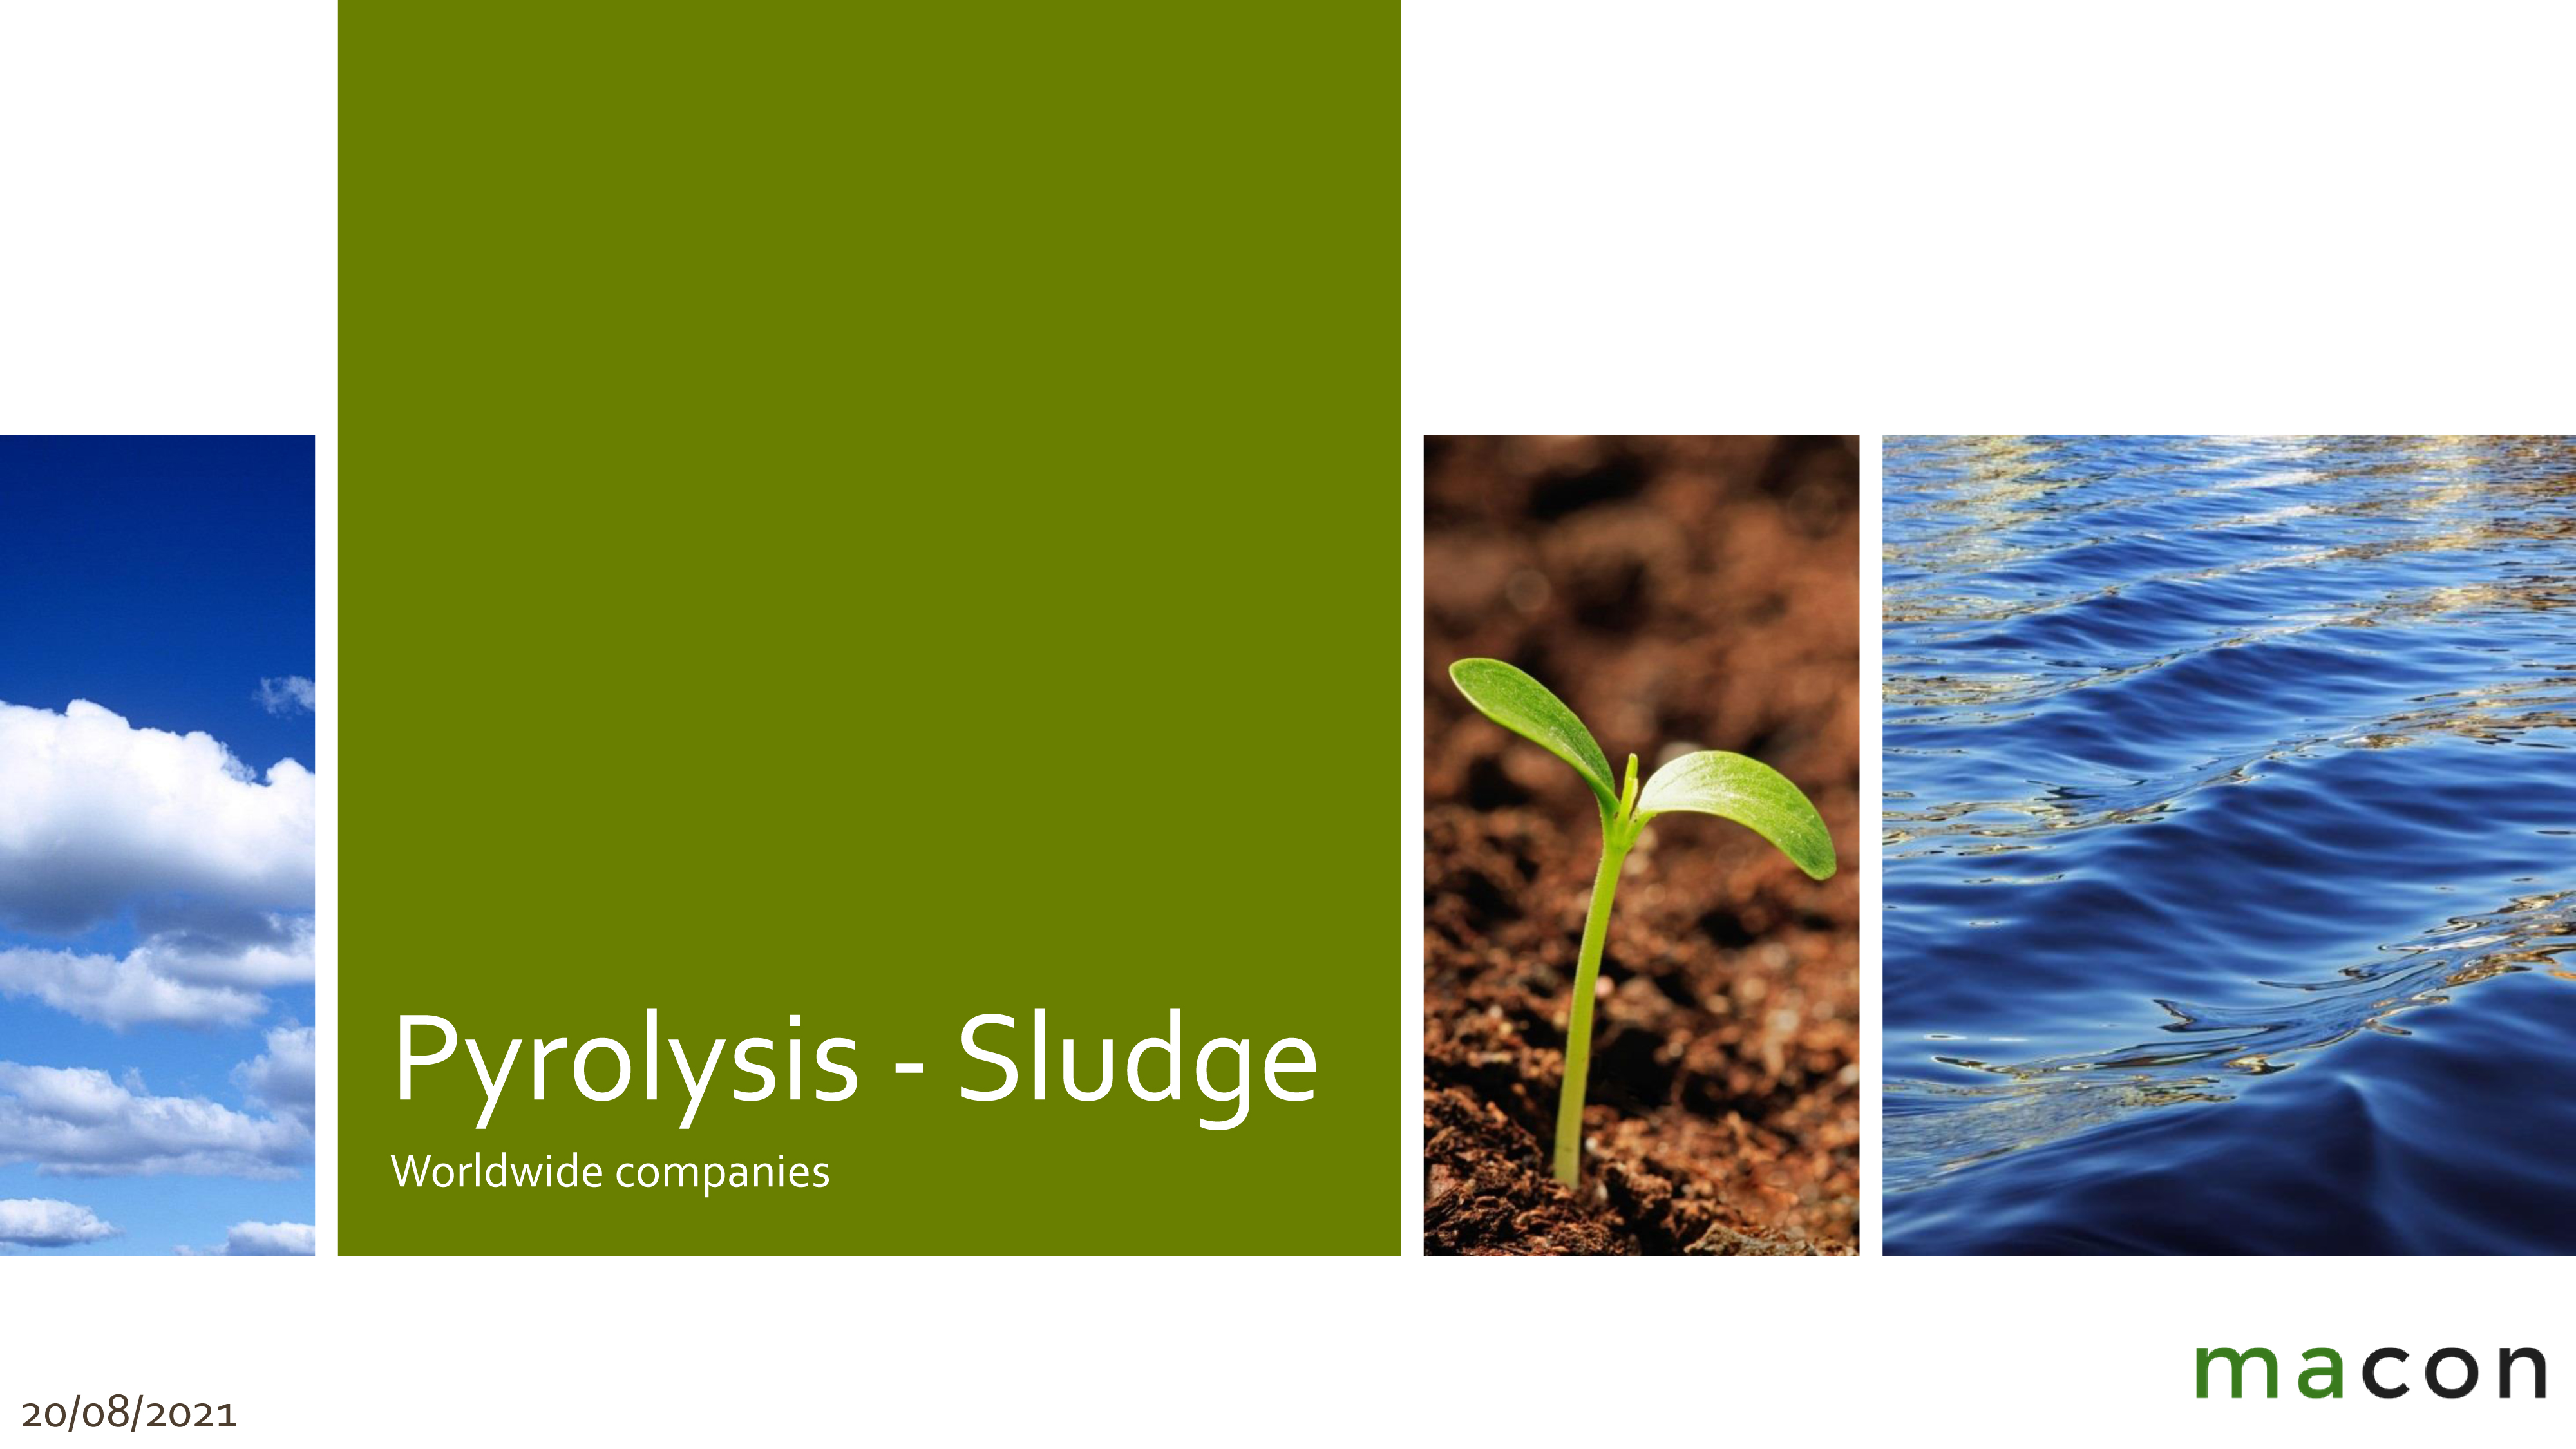 The cover of the pyrolysis presentation by Macon